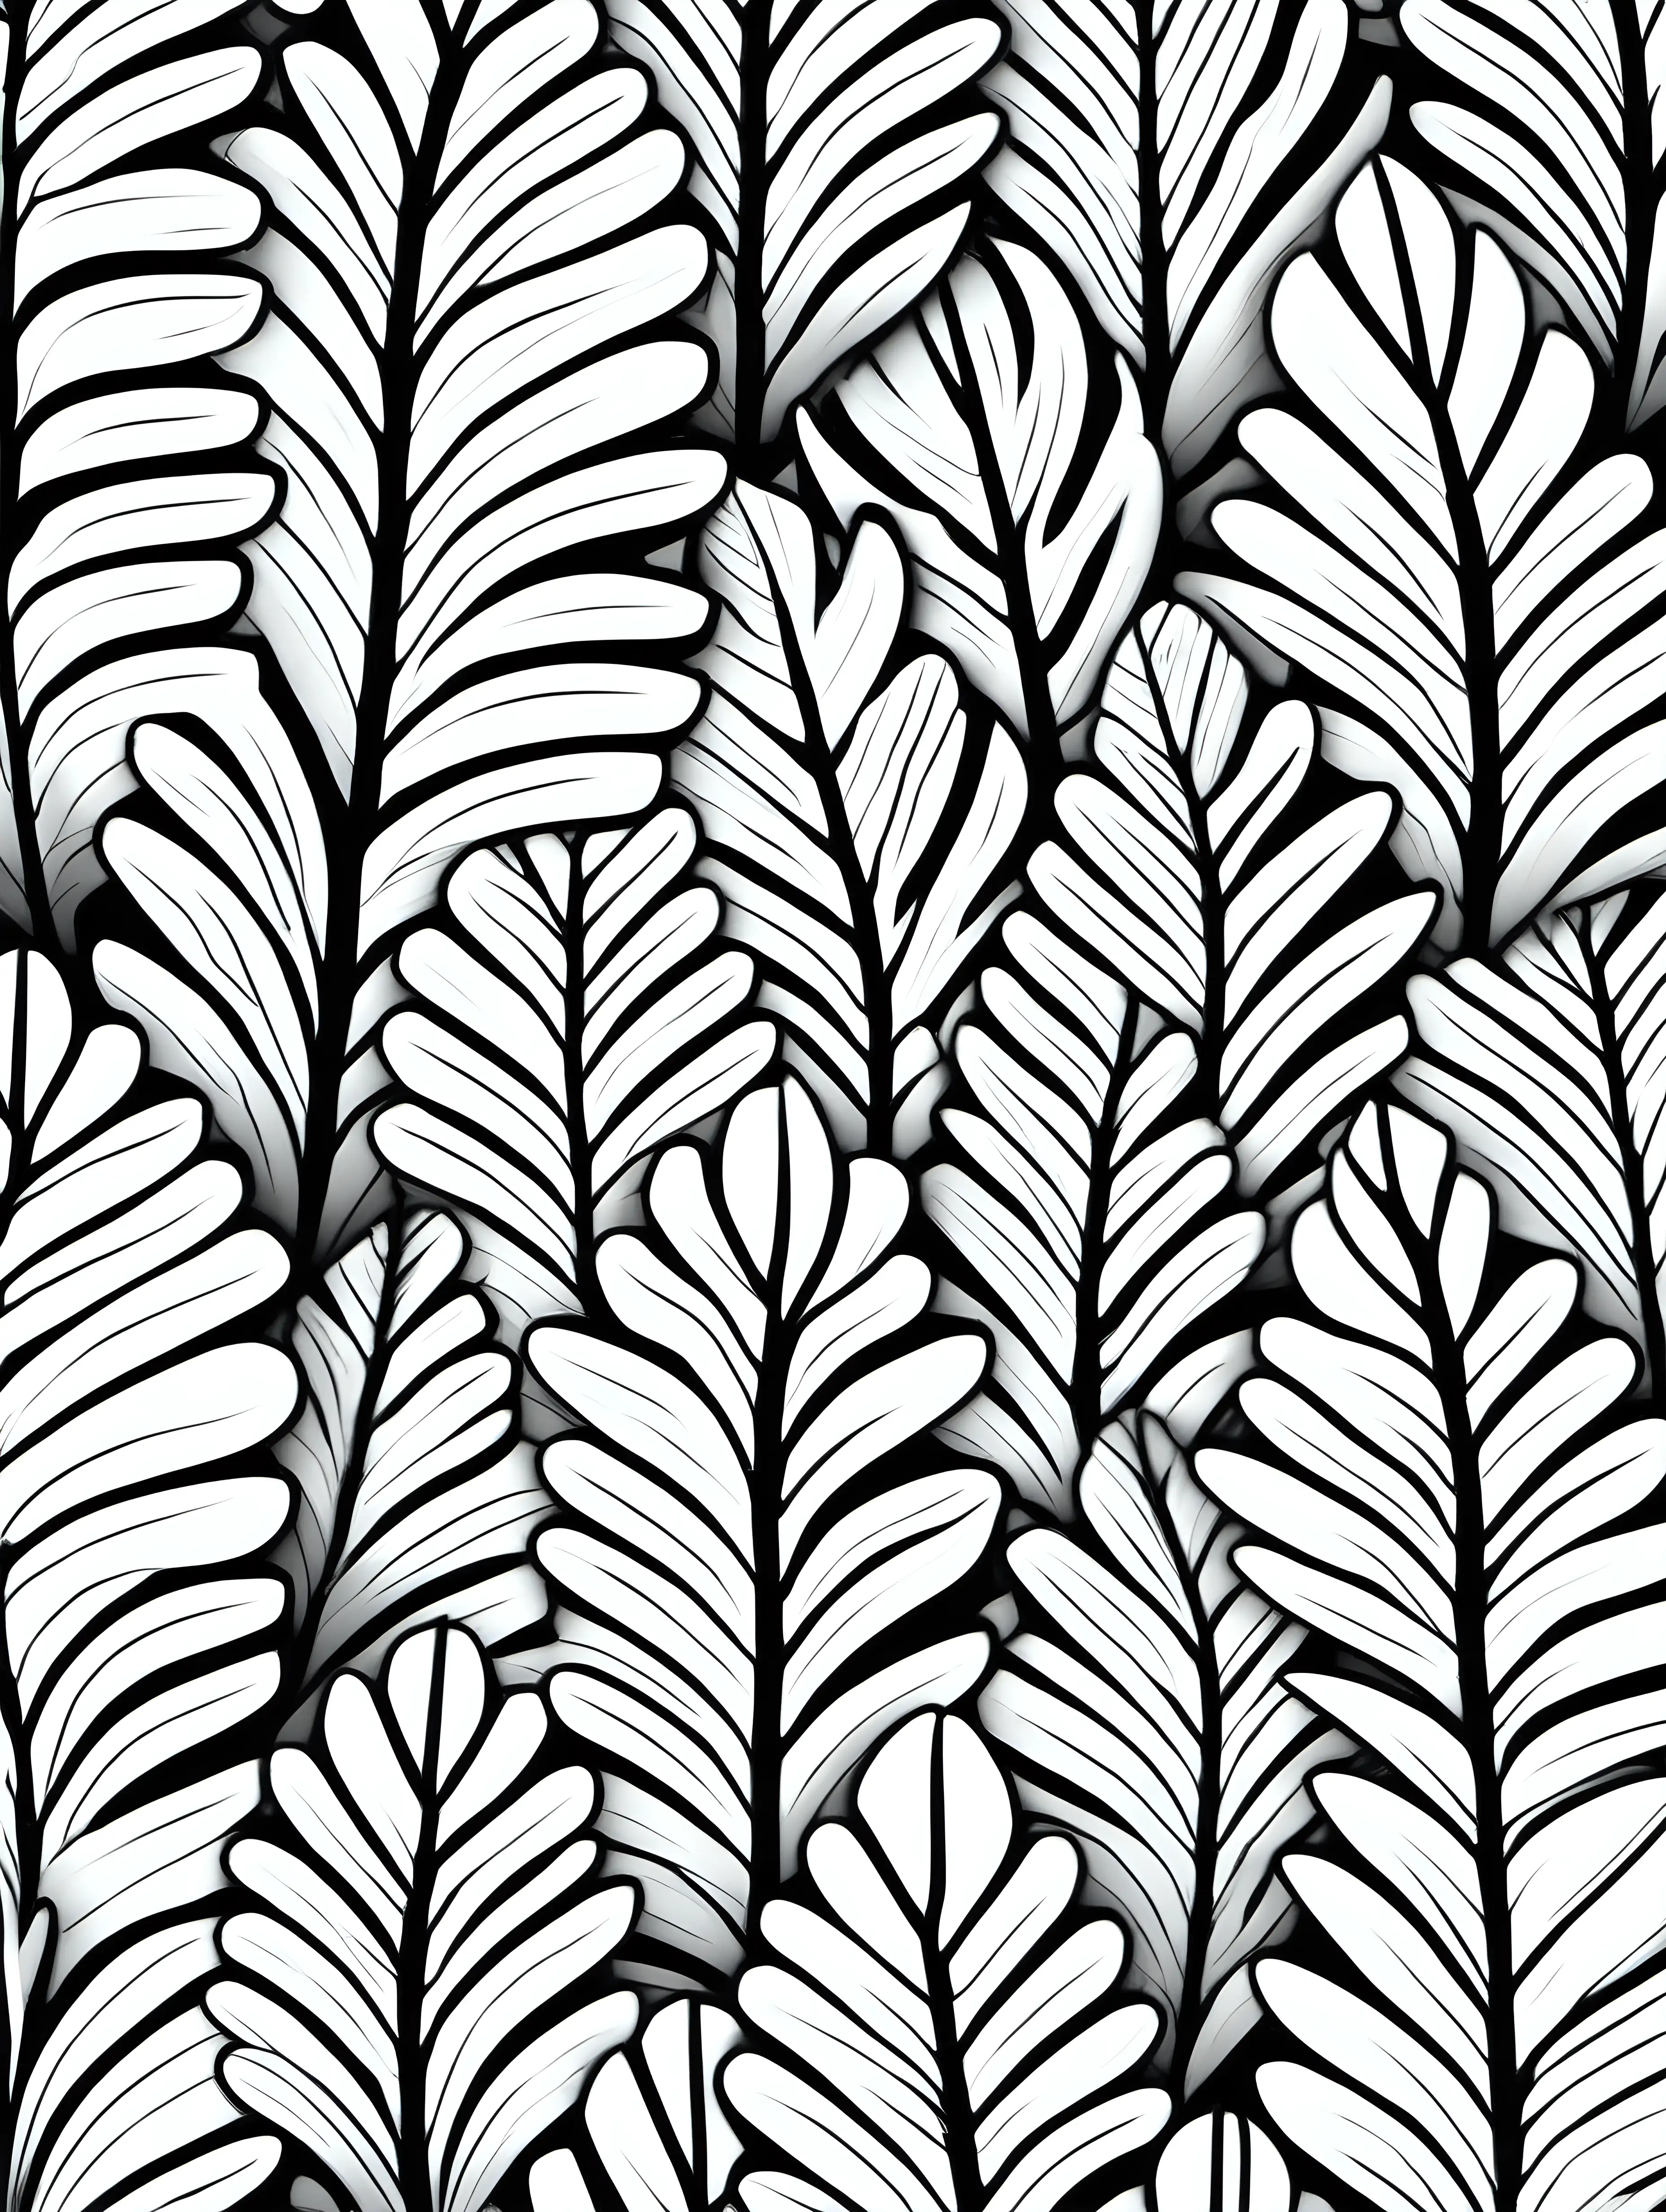 Repetitive Leaf Pattern Coloring Page for Relaxation and Creativity